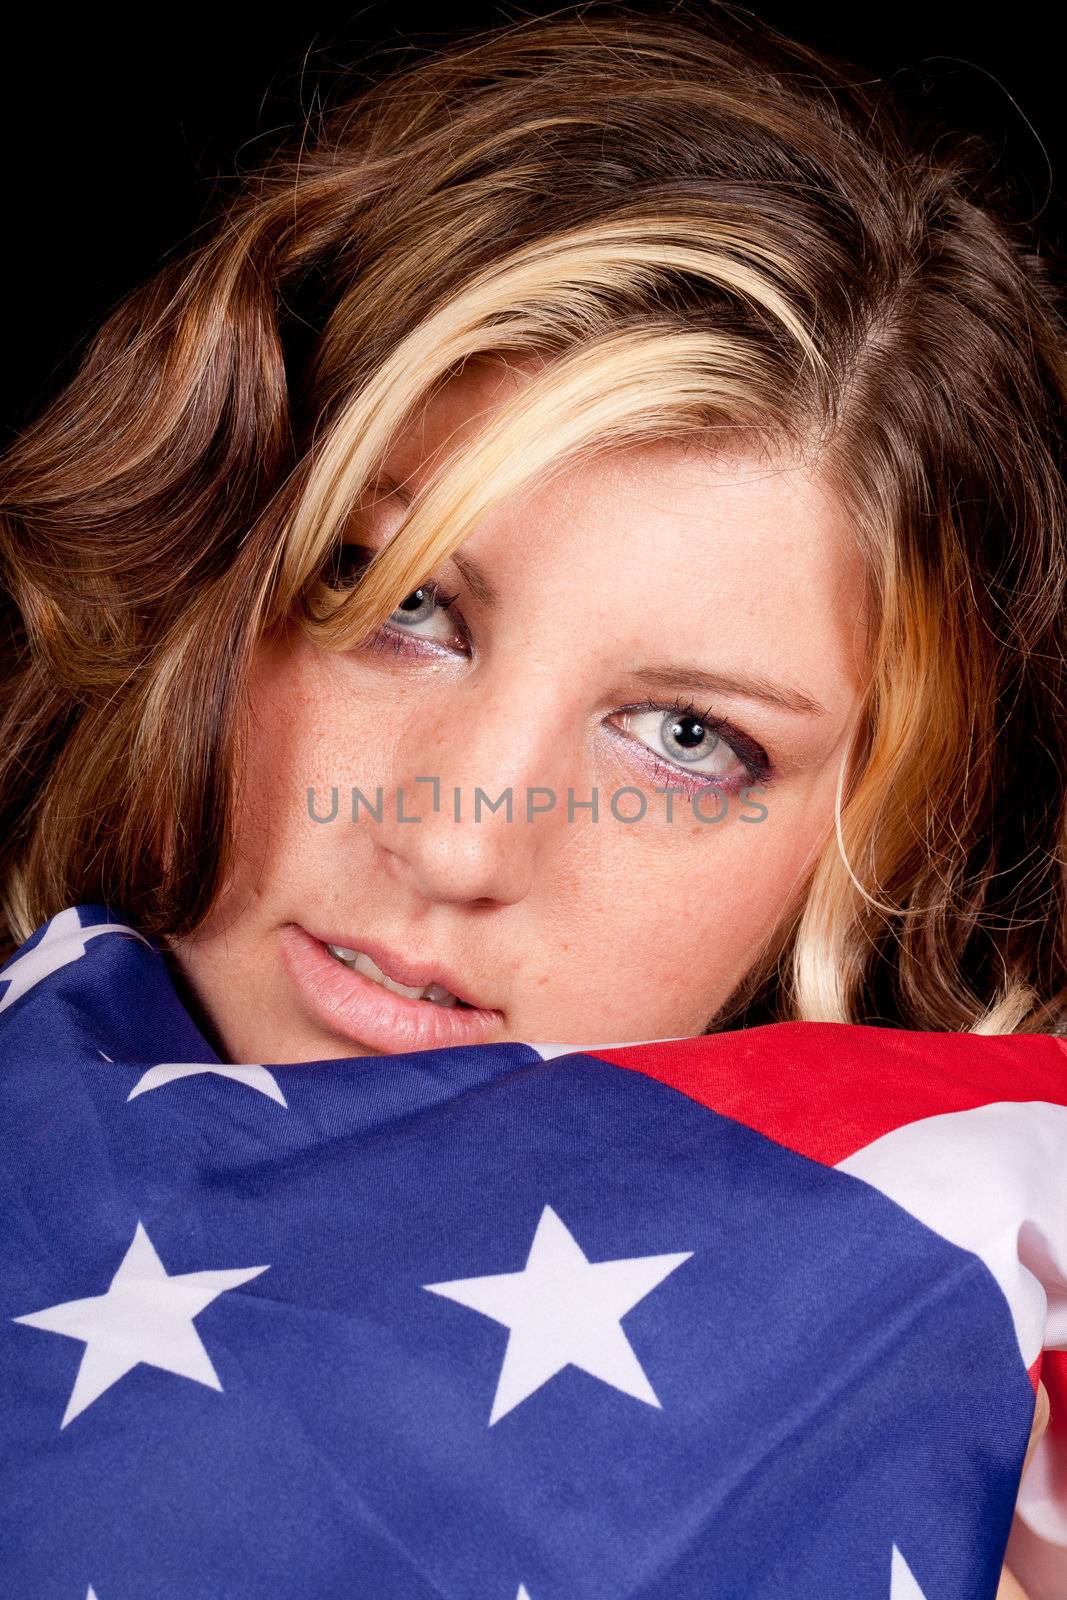 A girl holding the American flag near and dear to her.